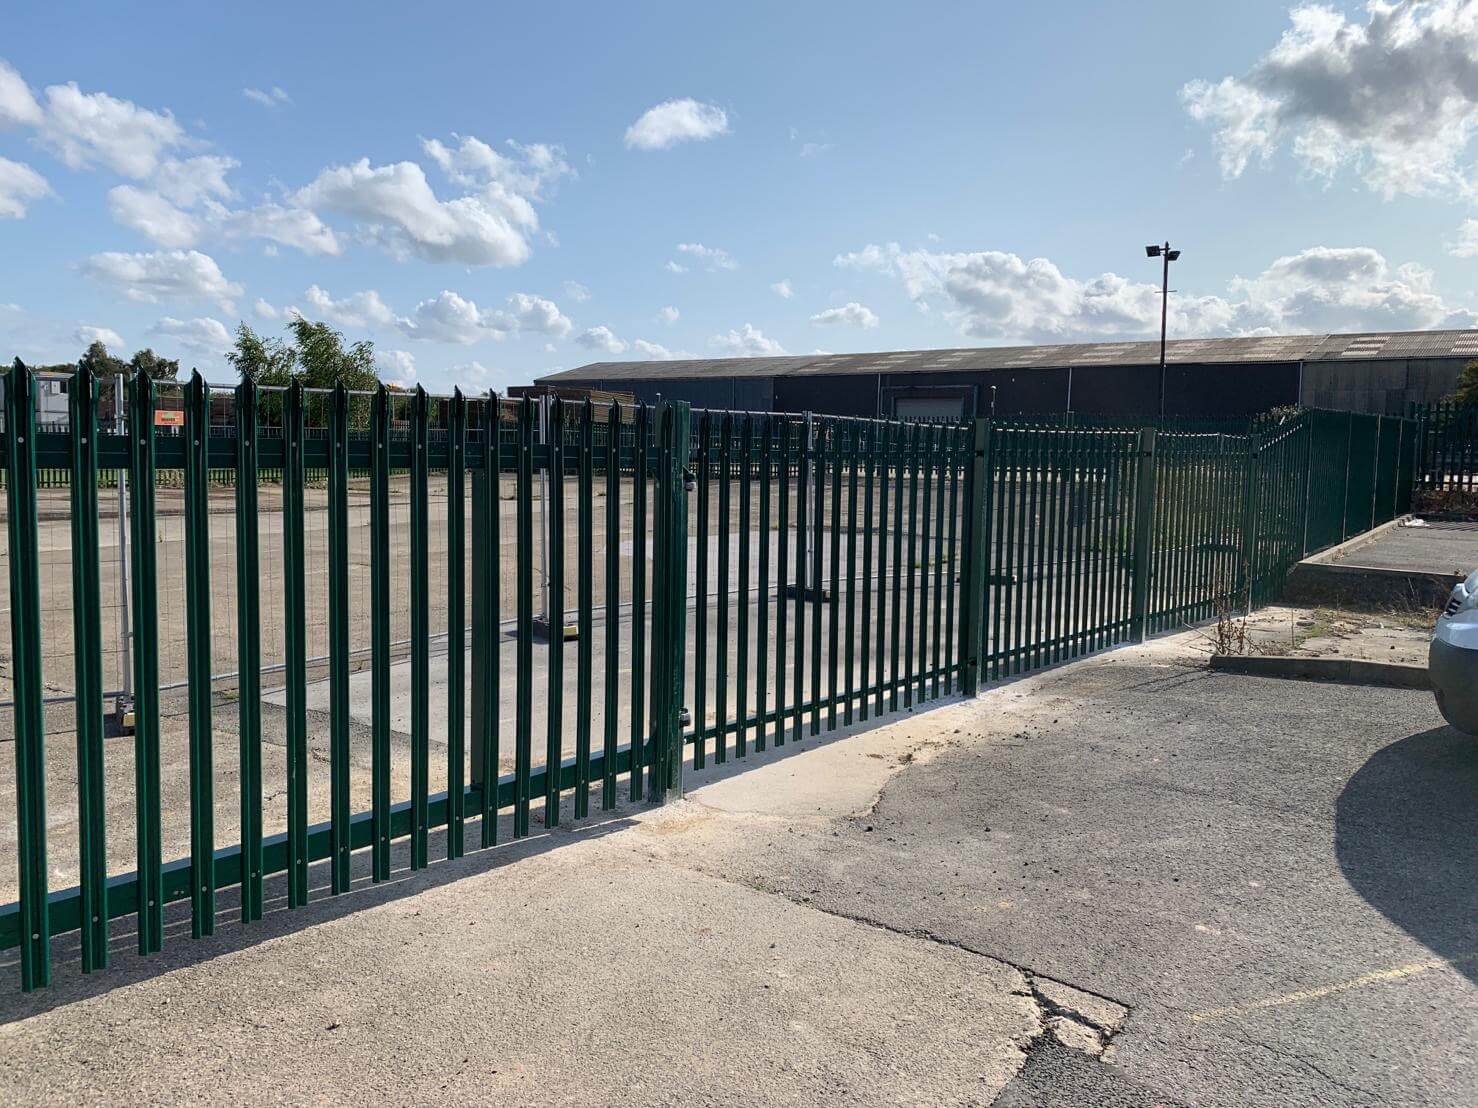 The Versatility of Ornamental Iron Fencing: From Residential to Commercial Applications